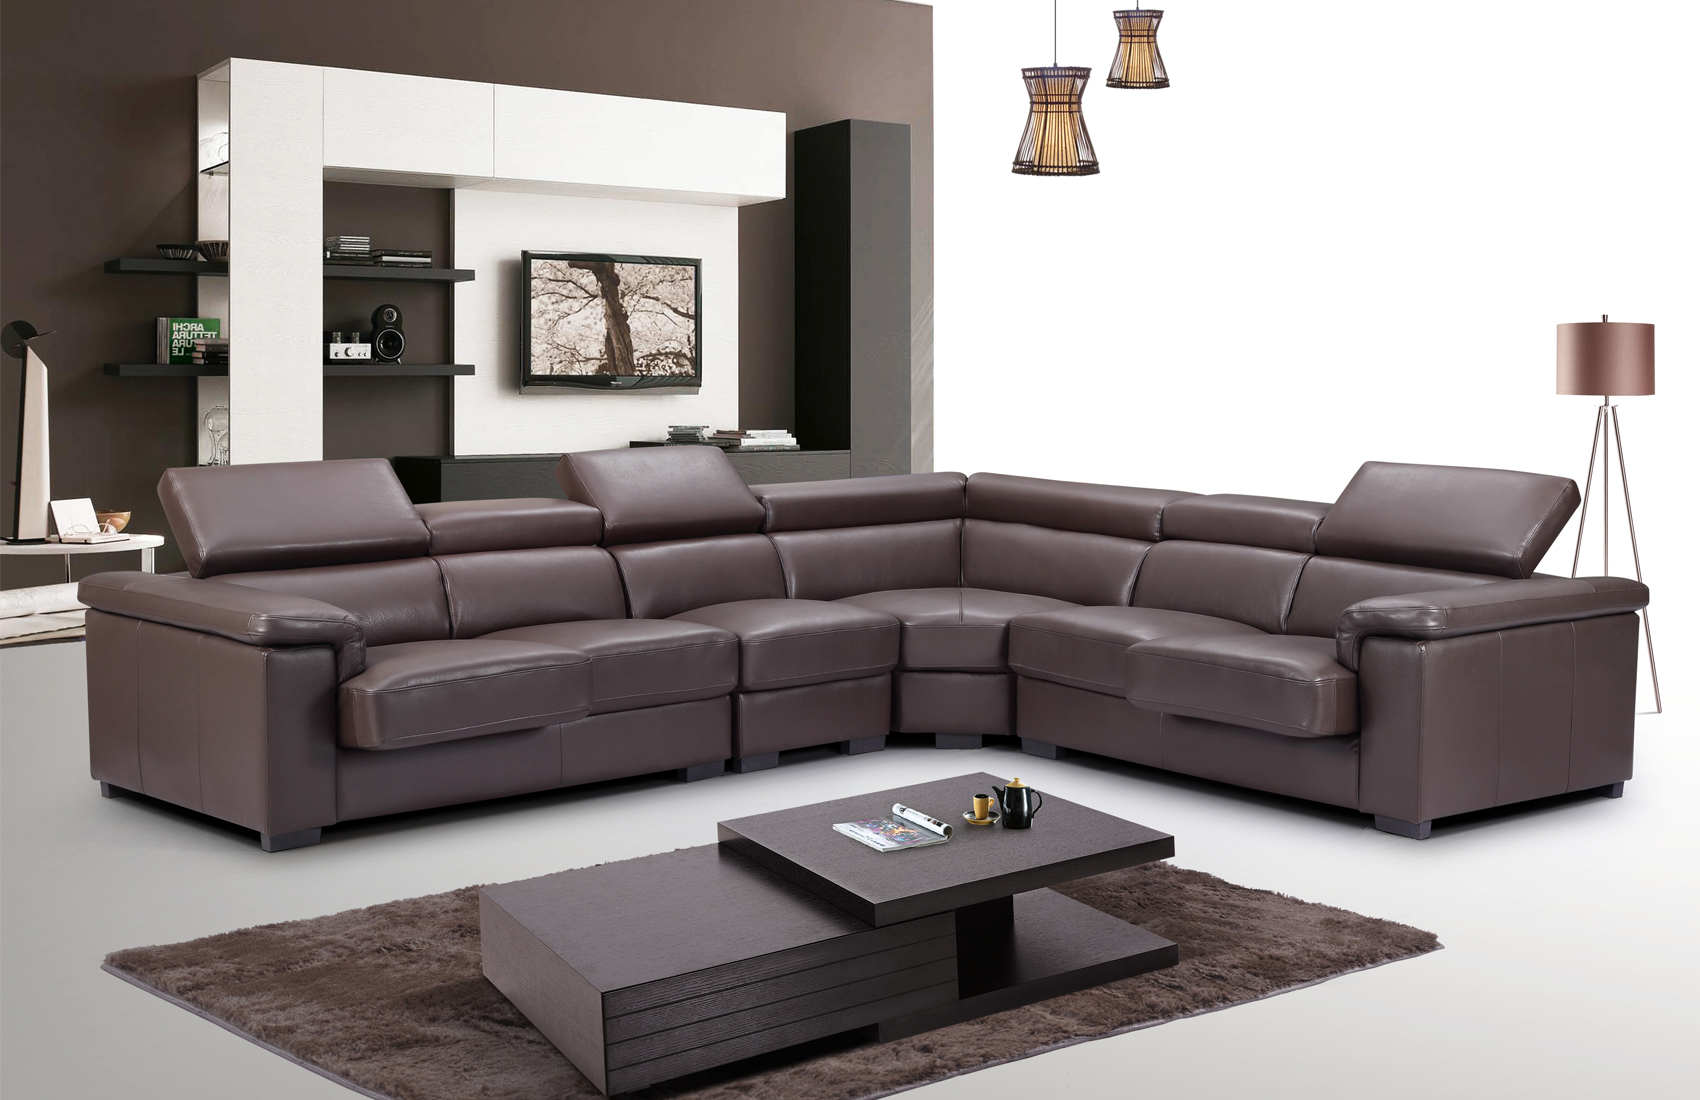 star furniture leather sectional sofa